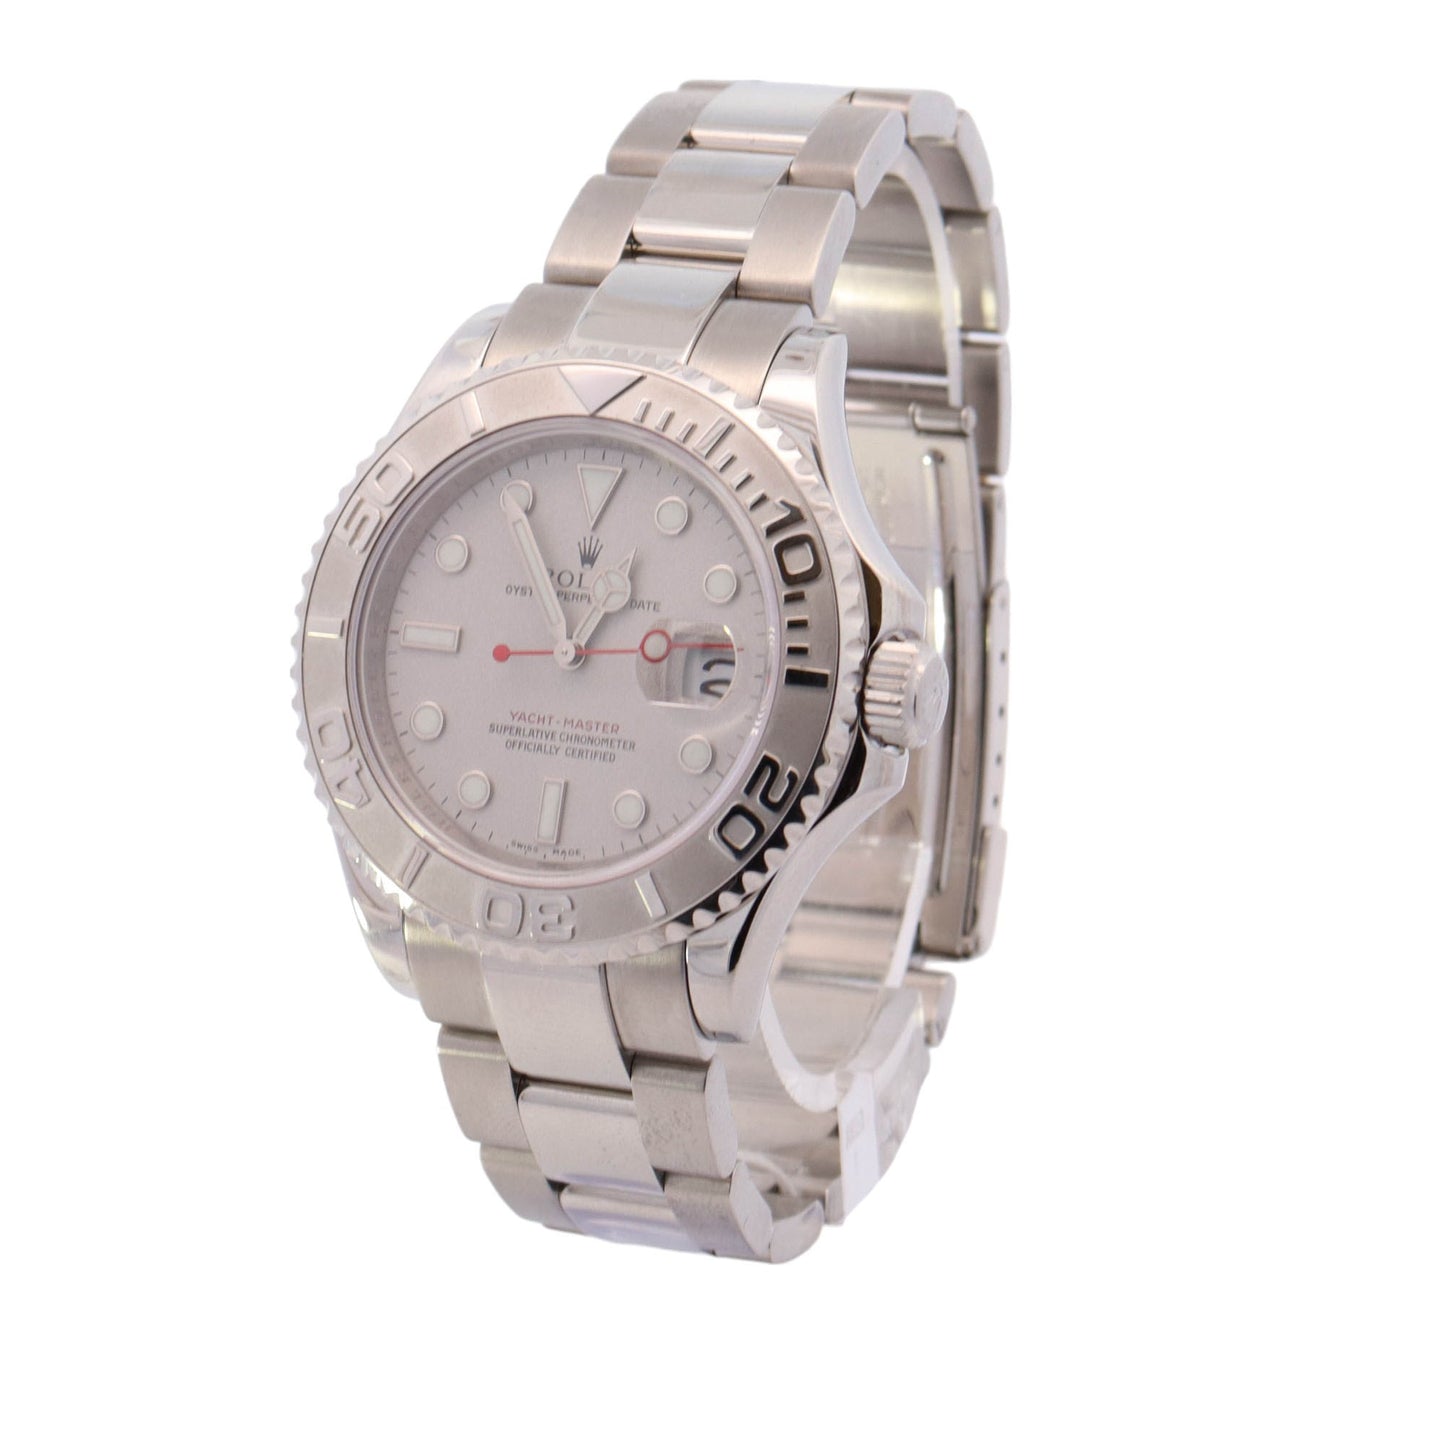 Rolex Yachtmaster Platinum and Stainless Steel 40mm Platinum Dial Watch Reference #: 16622 - Happy Jewelers Fine Jewelry Lifetime Warranty